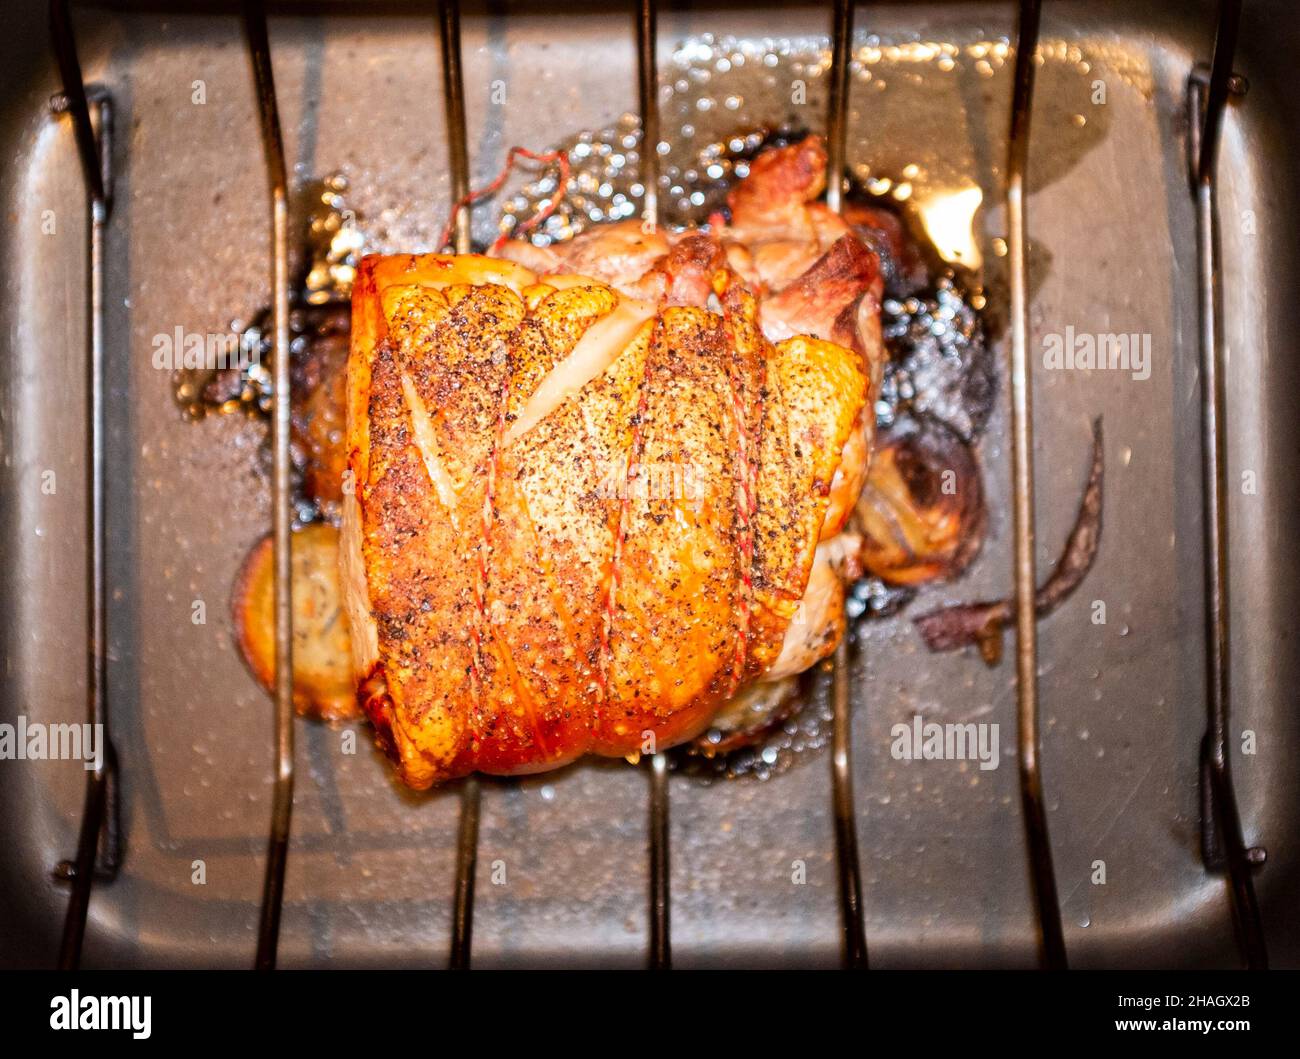 Roast Pork joint with crackling   Photograph taken by Simon Dack Stock Photo